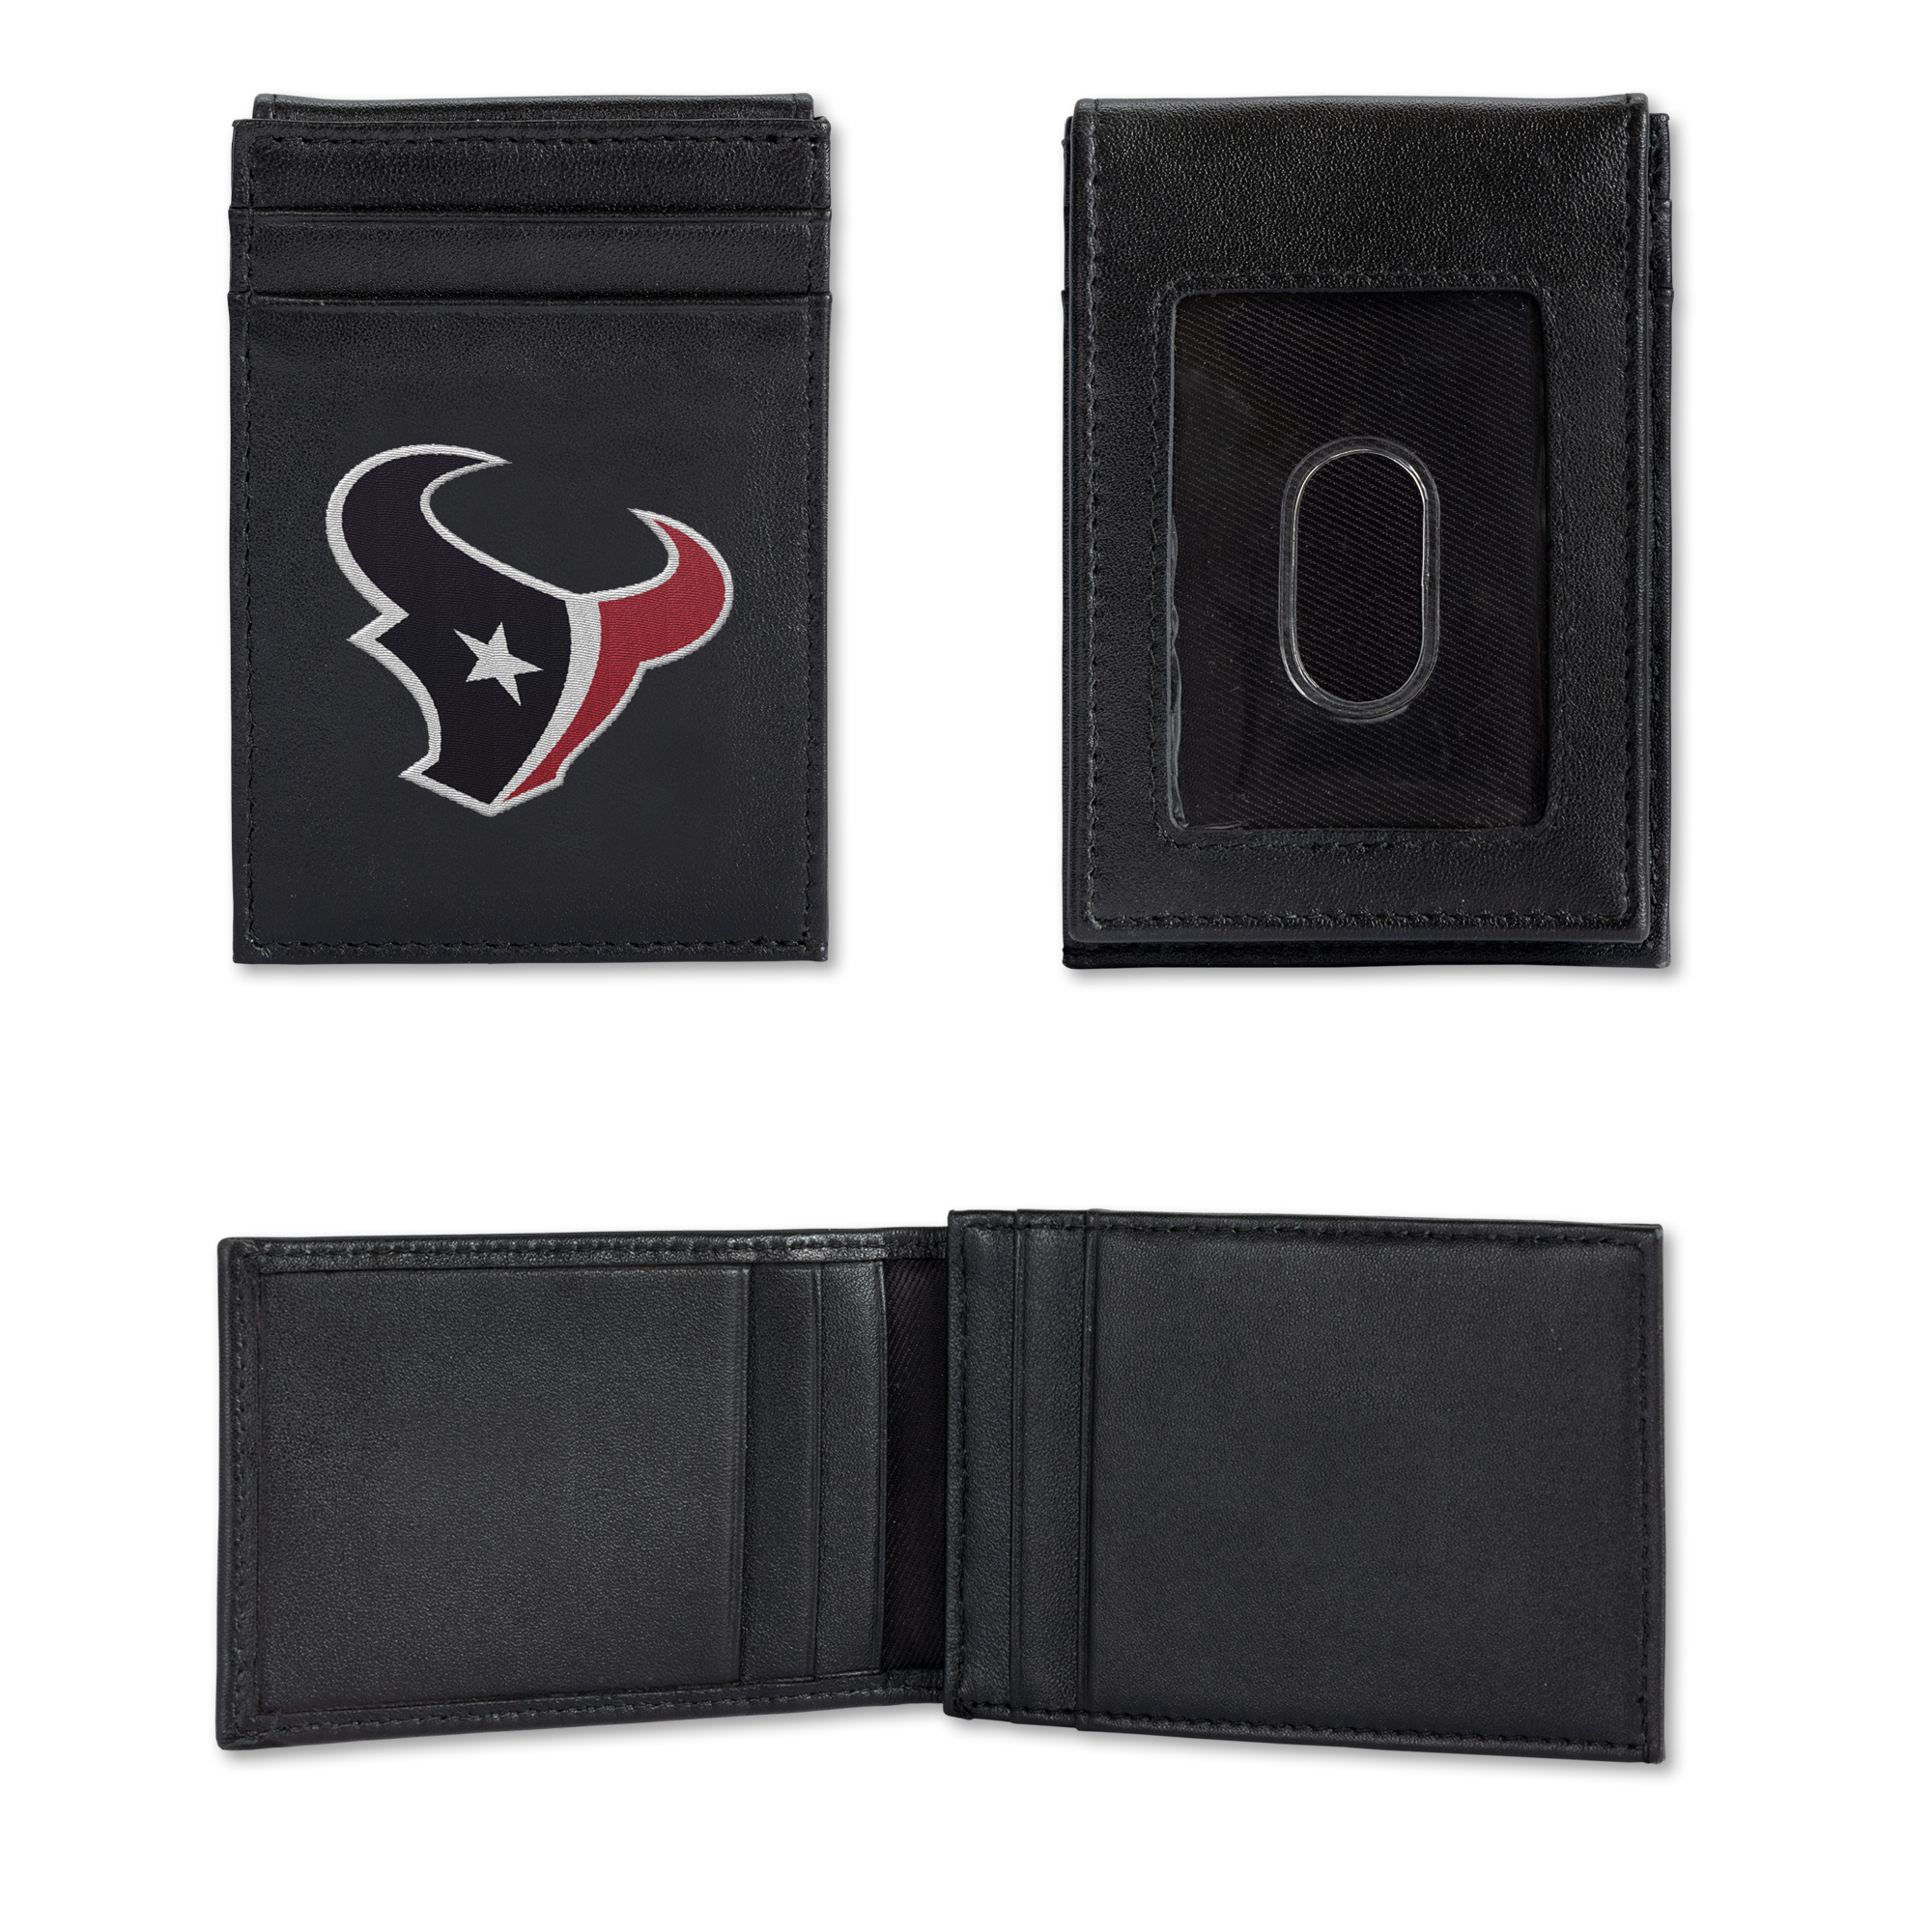 Rico NFL Rico Industries Houston Texans  Embroidered Front Pocket Wallet